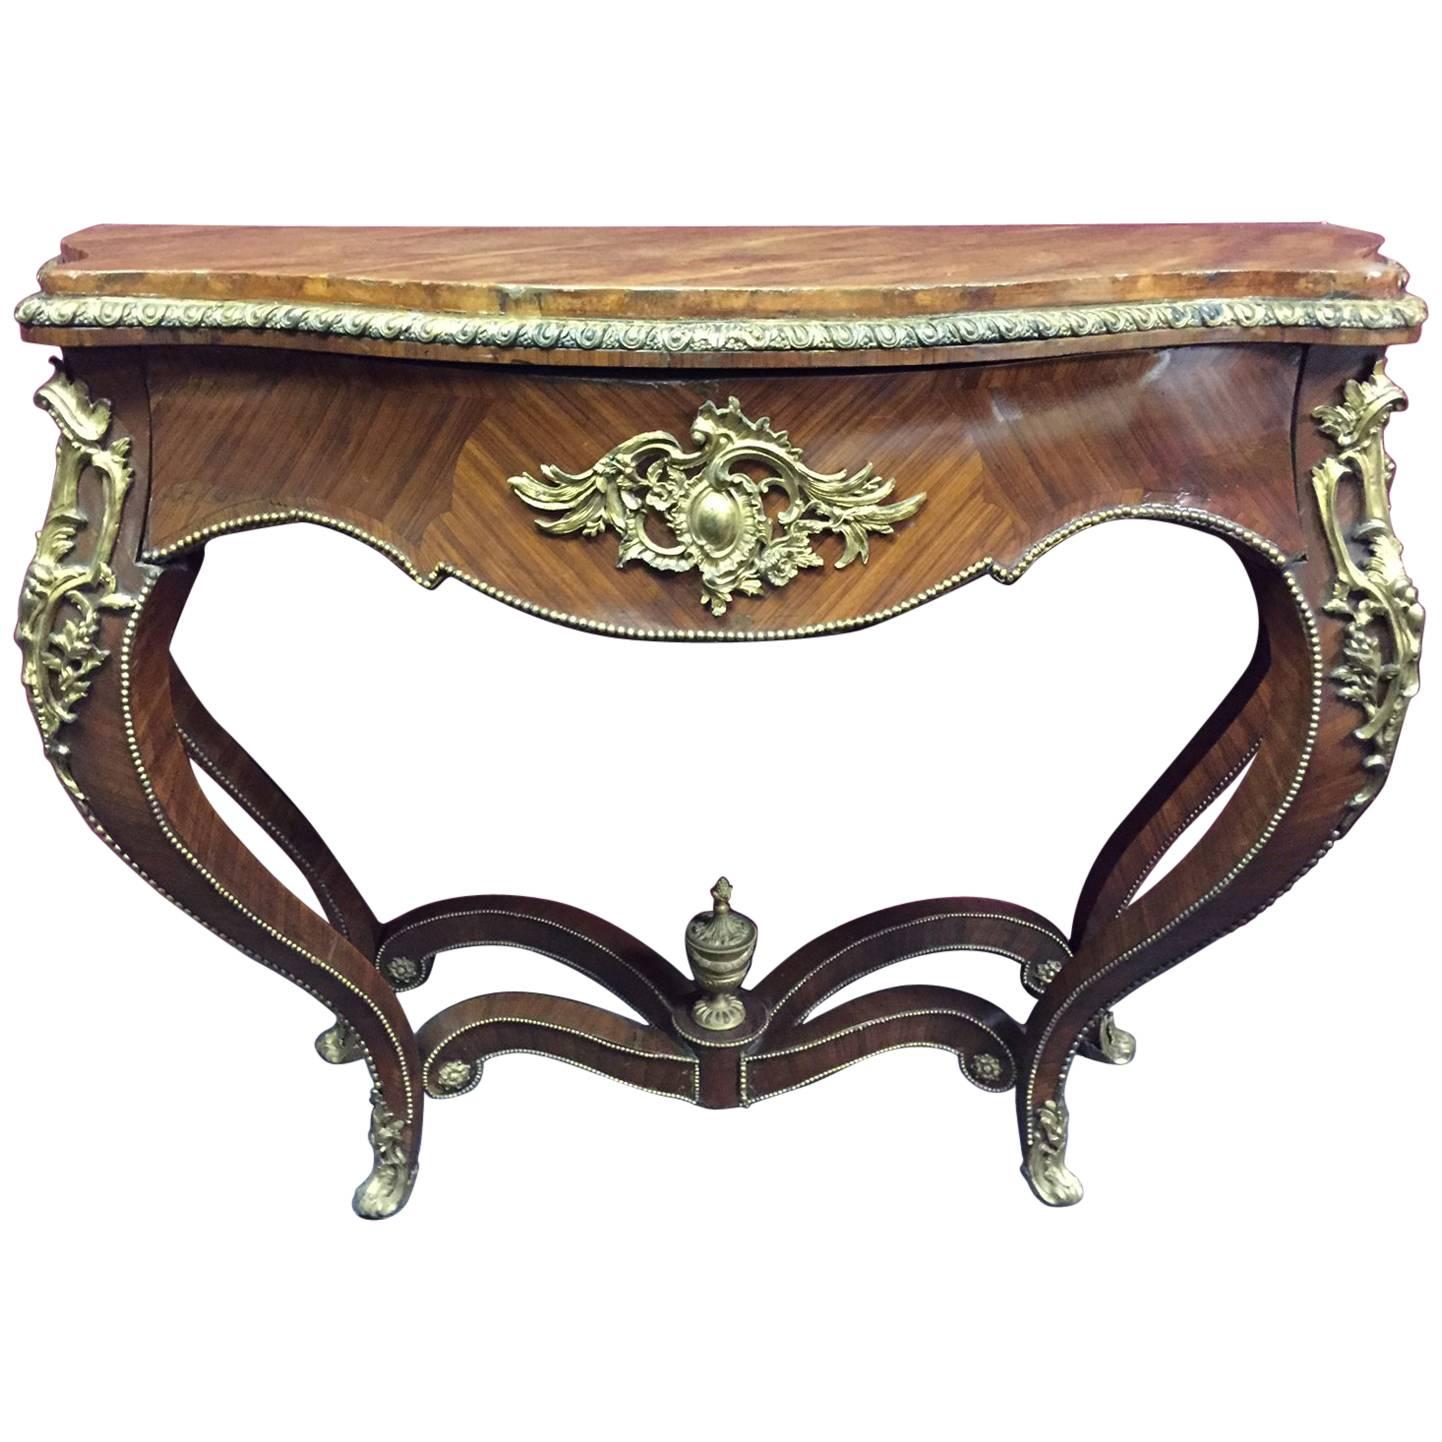 Louis XV Style Ormolu-Mounted Kingwood Console, 19th Century For Sale